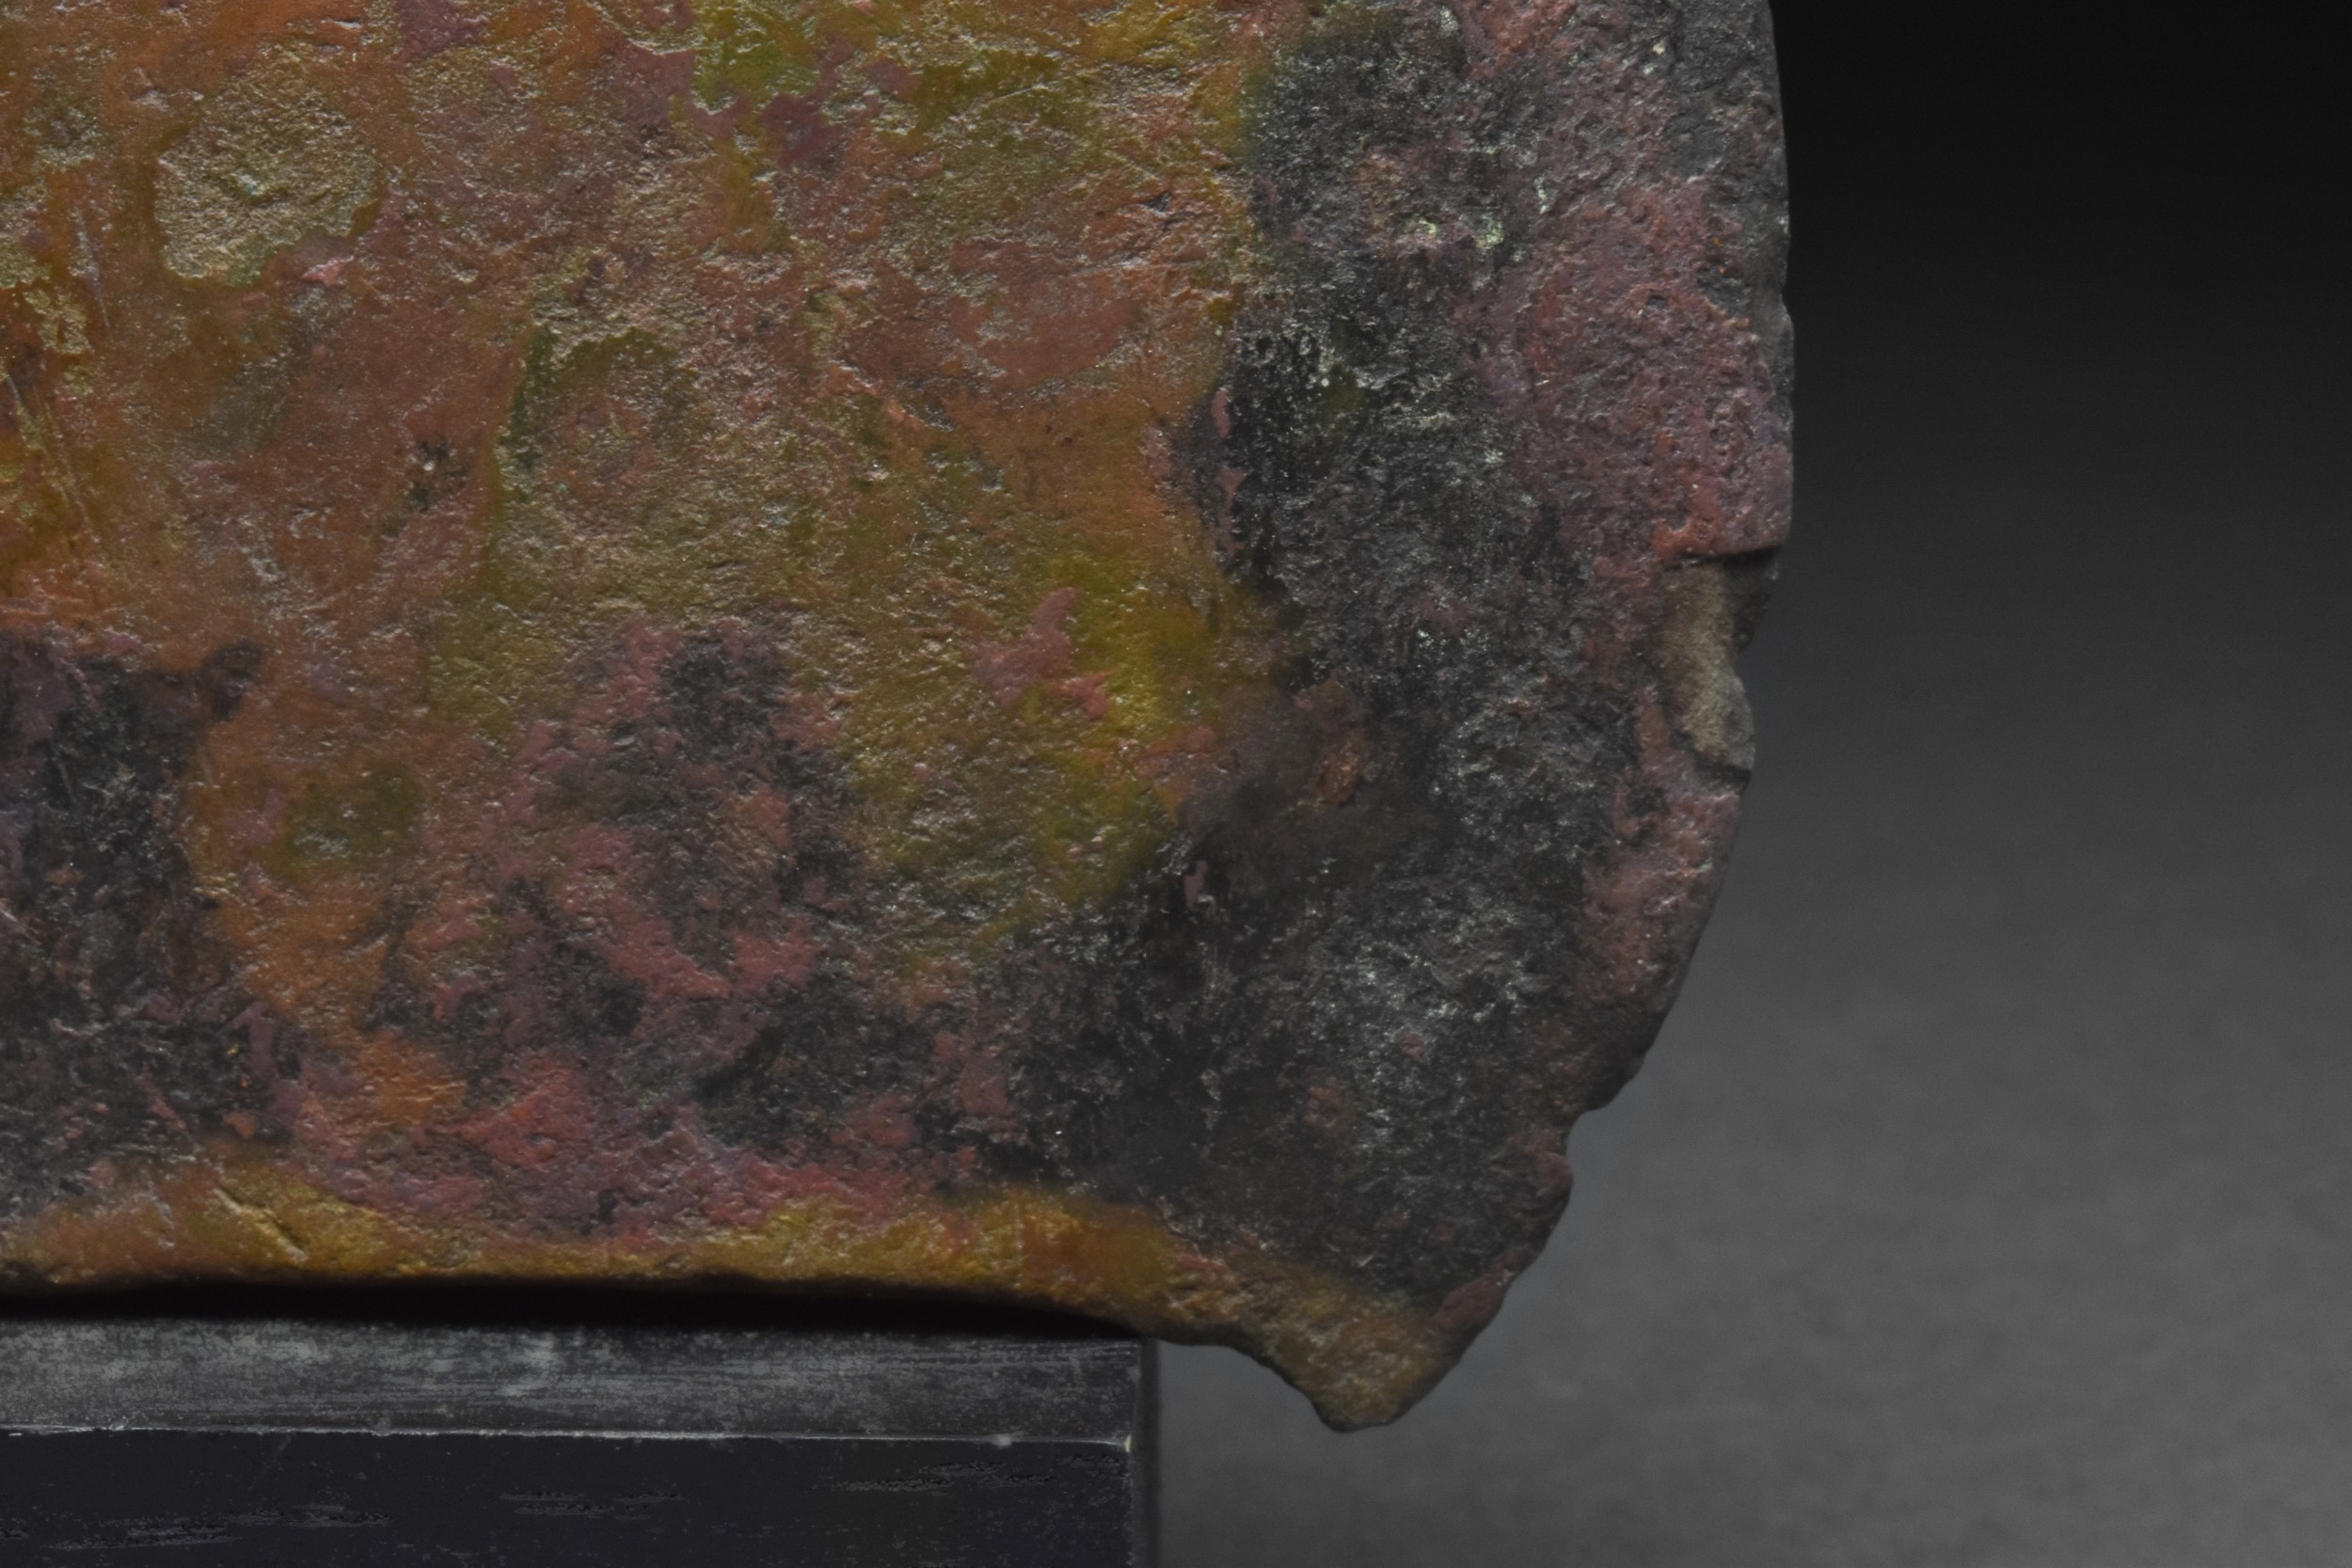 EGYPTIAN BRONZE OR COPPER ALLOY AXE HEAD - WITH REPORT - Image 4 of 5